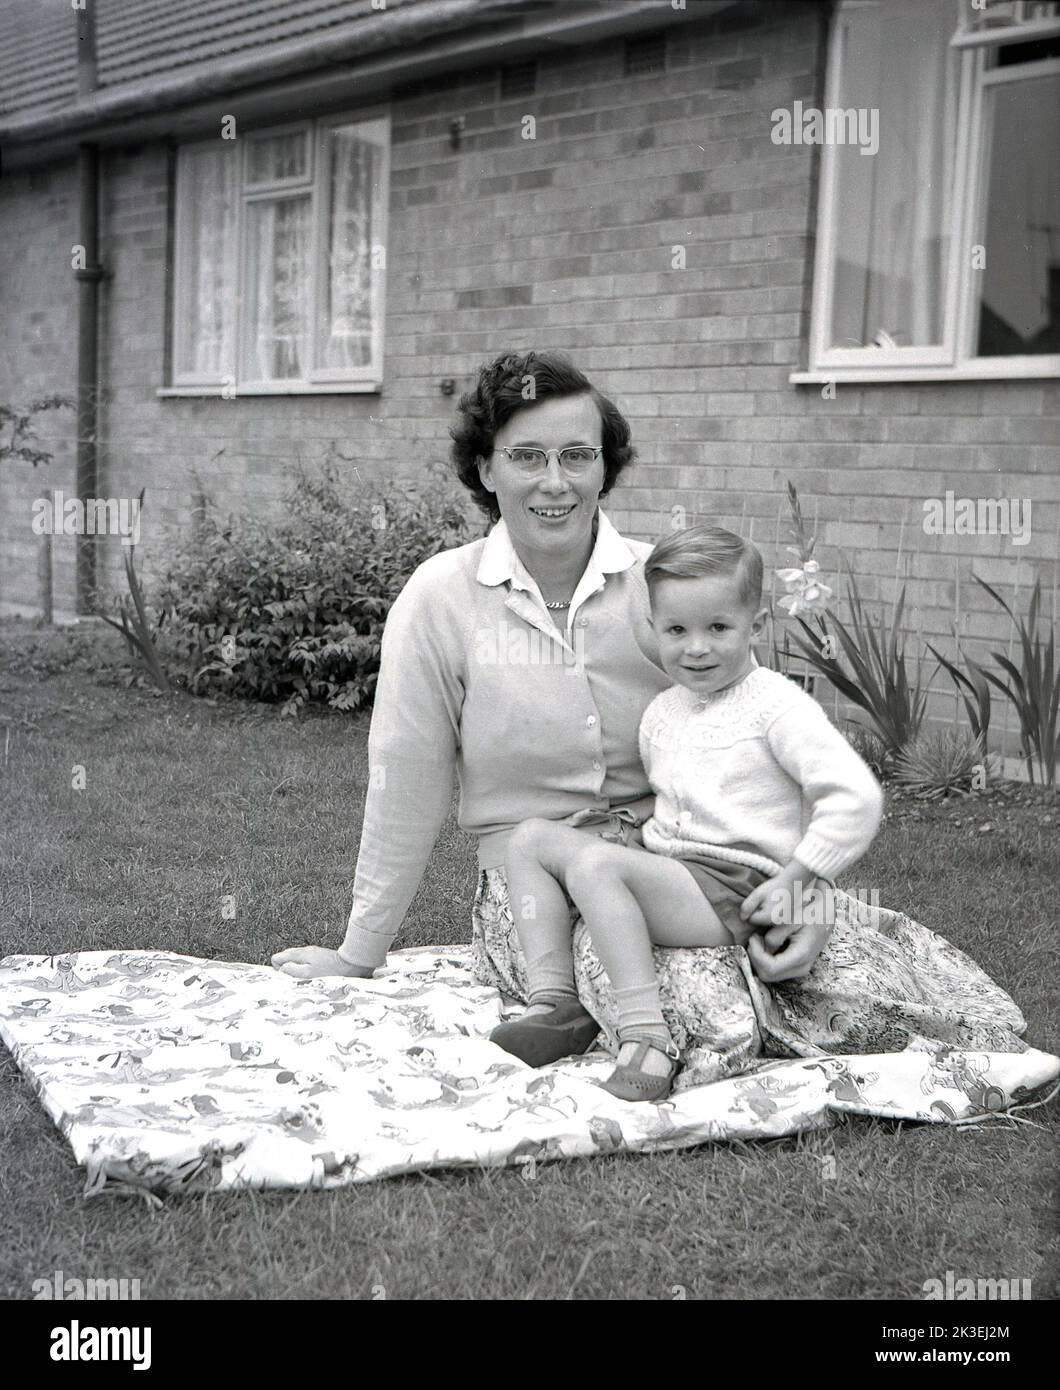 1962, historical, mother sitting outside a house on a patterned child's rub with her young son, on her lap, Hull, England  UK. Stock Photo